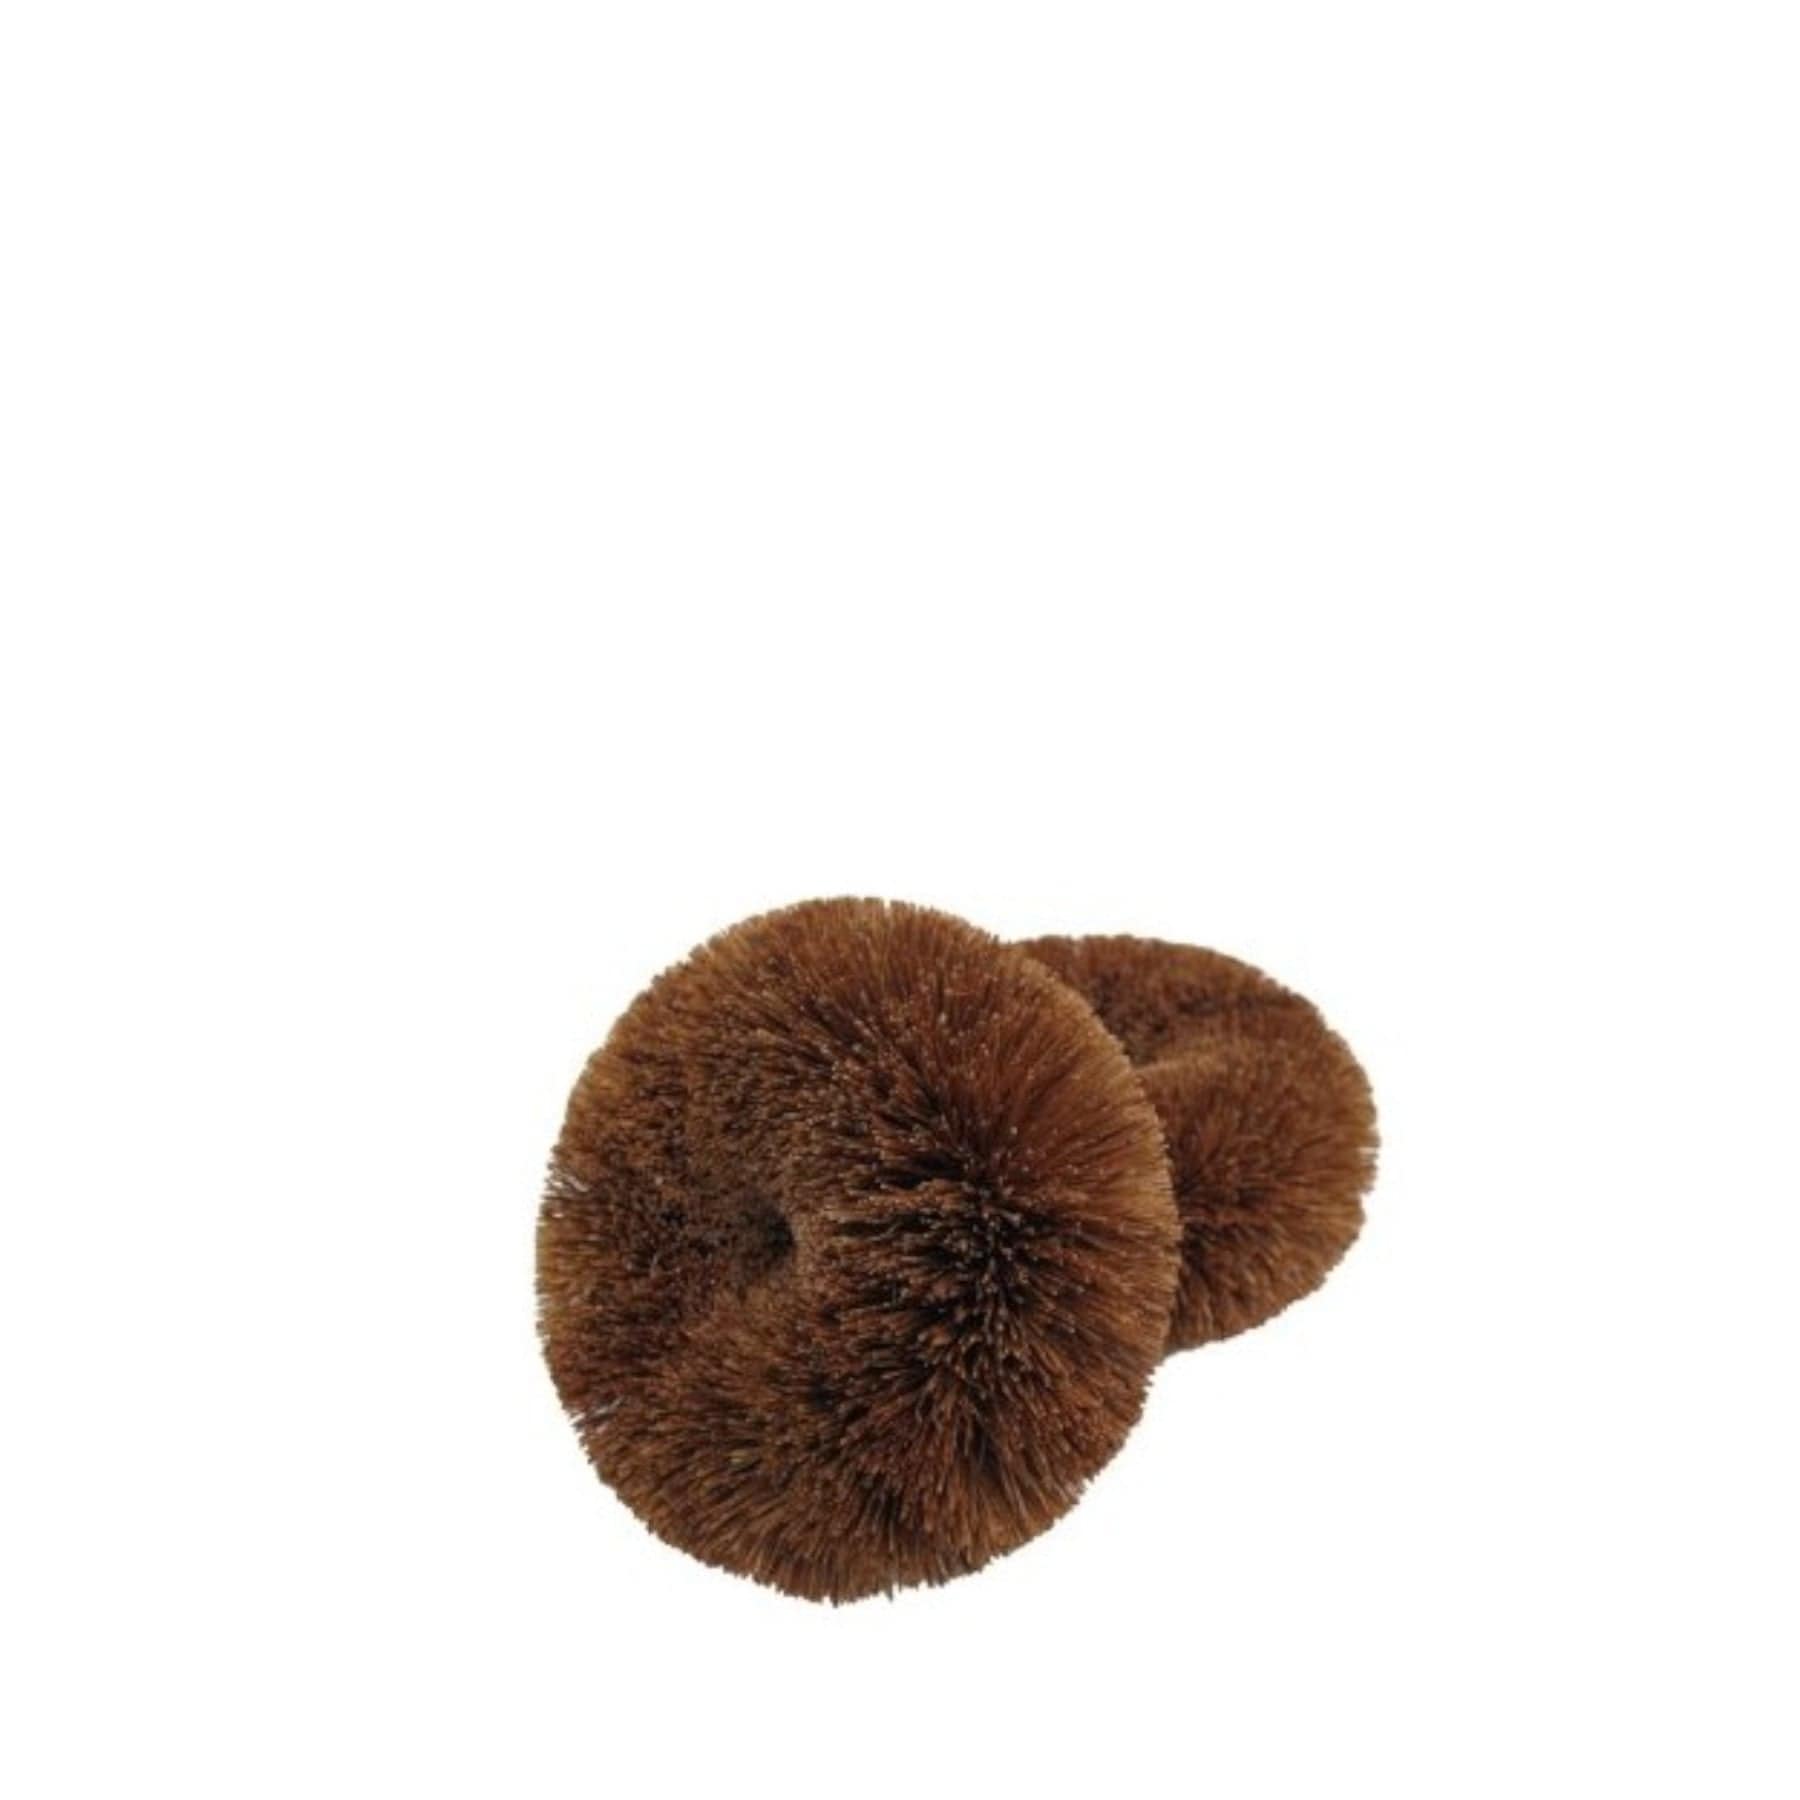 Brown scrubber sponges on white background, cleaning tools, kitchen scouring pads, non-scratch dish scrubbers